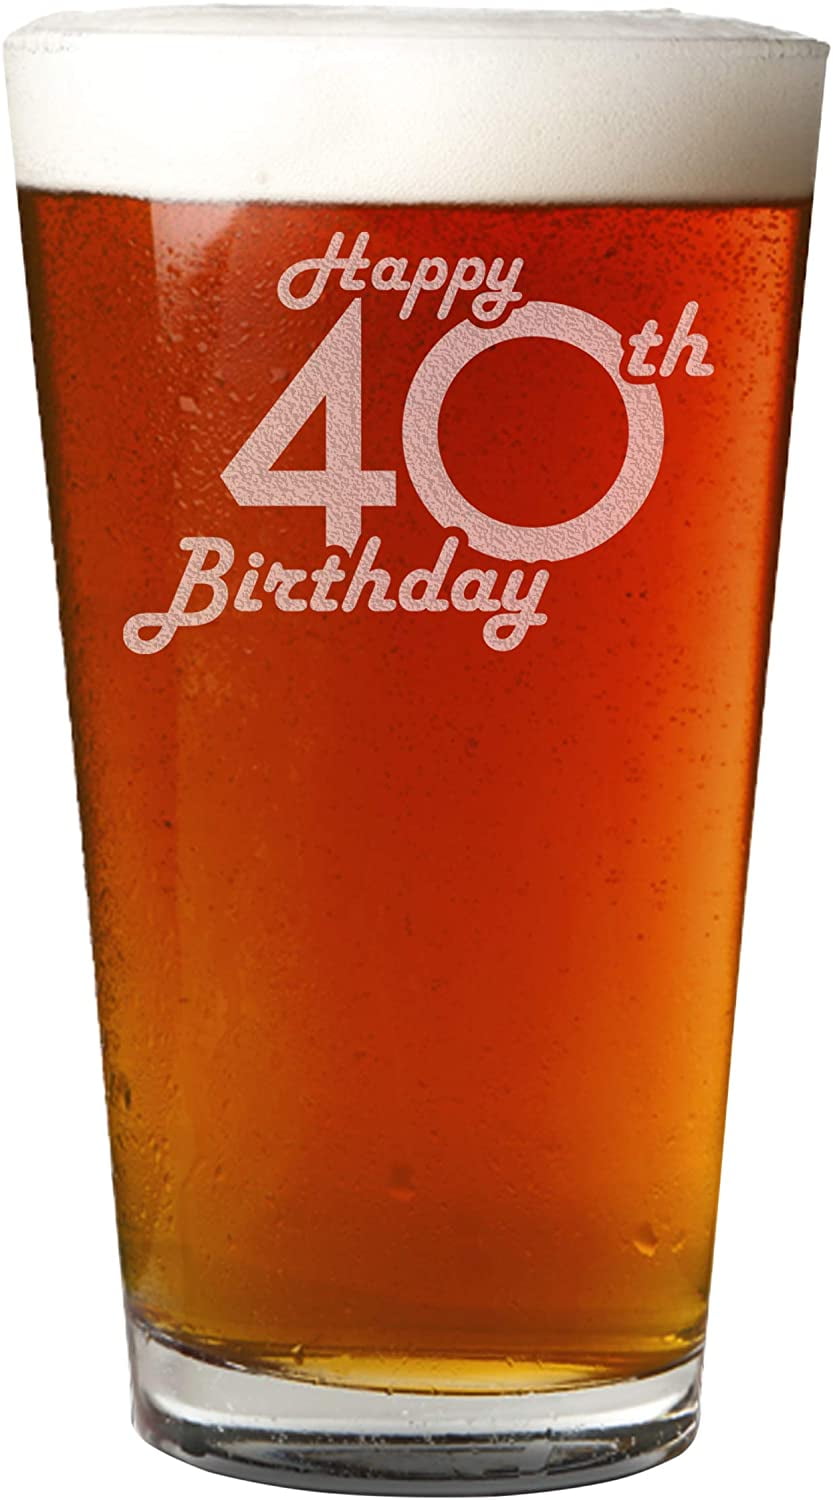 Reunion Gift for Him or Her 1979 Vintage Edition 40th Birthday Beer Glass for Men and Women Classic Birthday Gift 16 oz- Elegant Happy Birthday Pint Beer Glasses for Craft Beer 40th Anniversary 